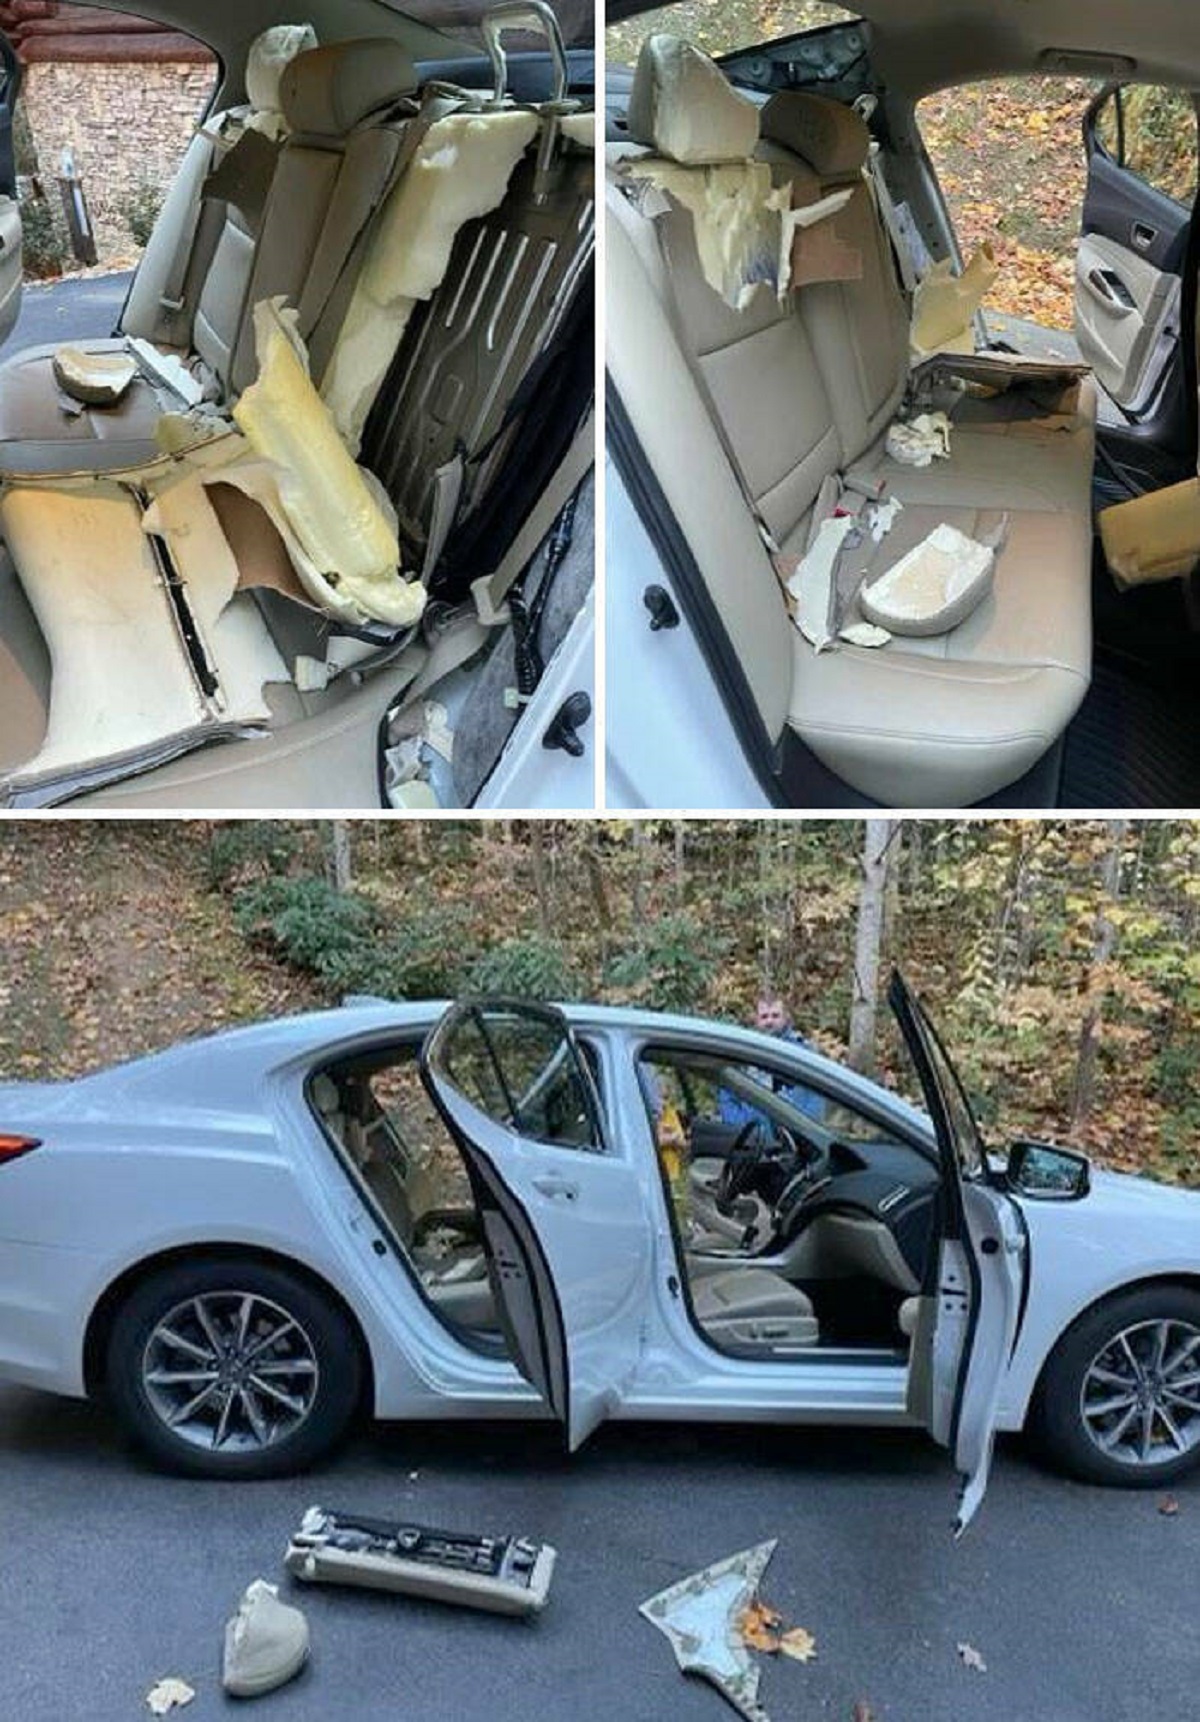 "This Is What Happens When You Go To The Mountains And Forget To Lock Your Doors. I Bet The Insurance Claim Will Be Unbearable"